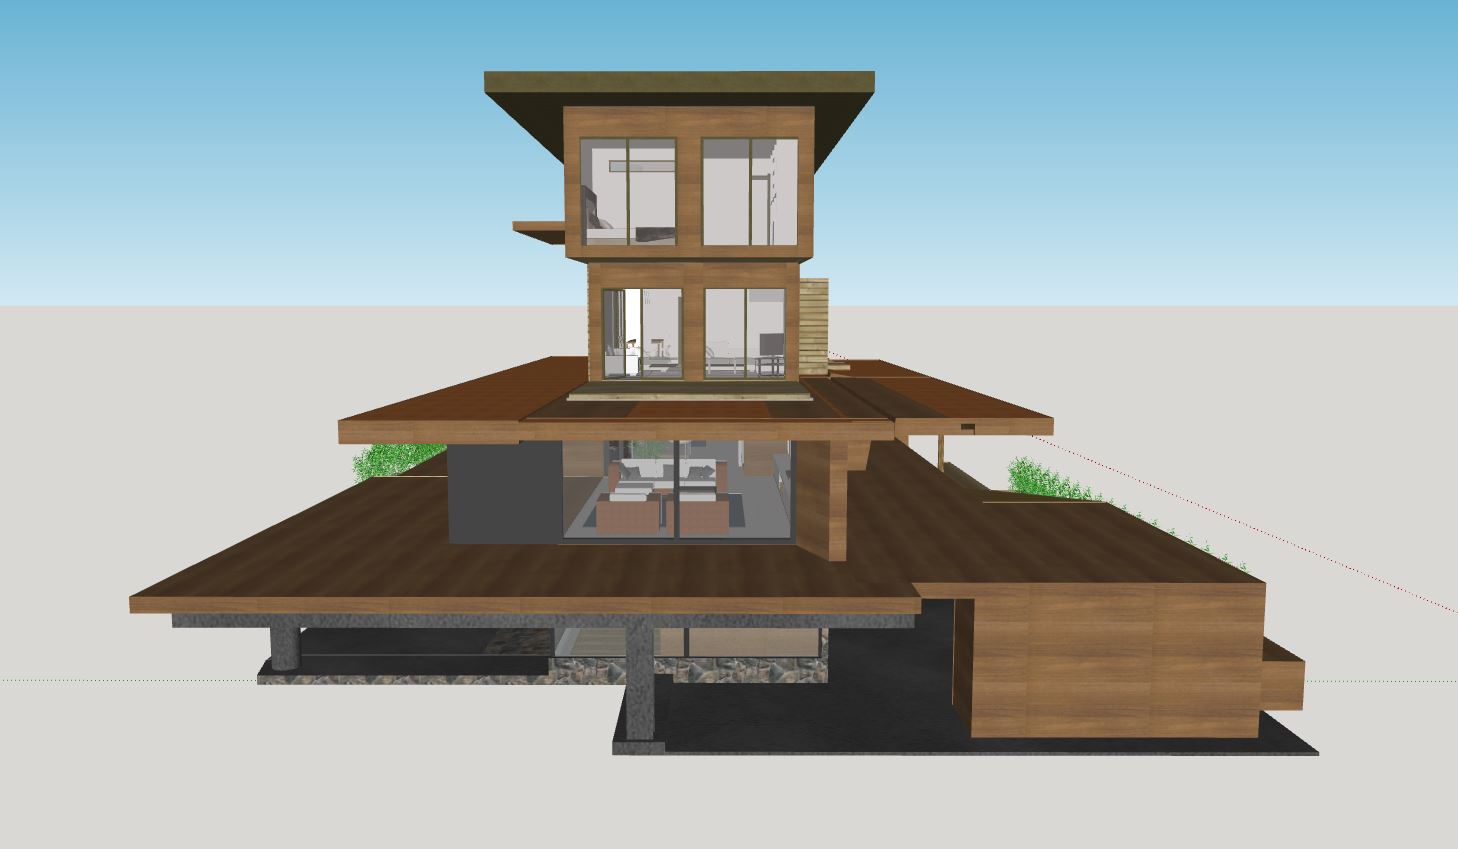 File sketchup biệt thự 3 tầng,model su biệt thự 3 tầng,phối cảnh biệt thự 3 tầng,biệt thự 3 tầng hiện đại